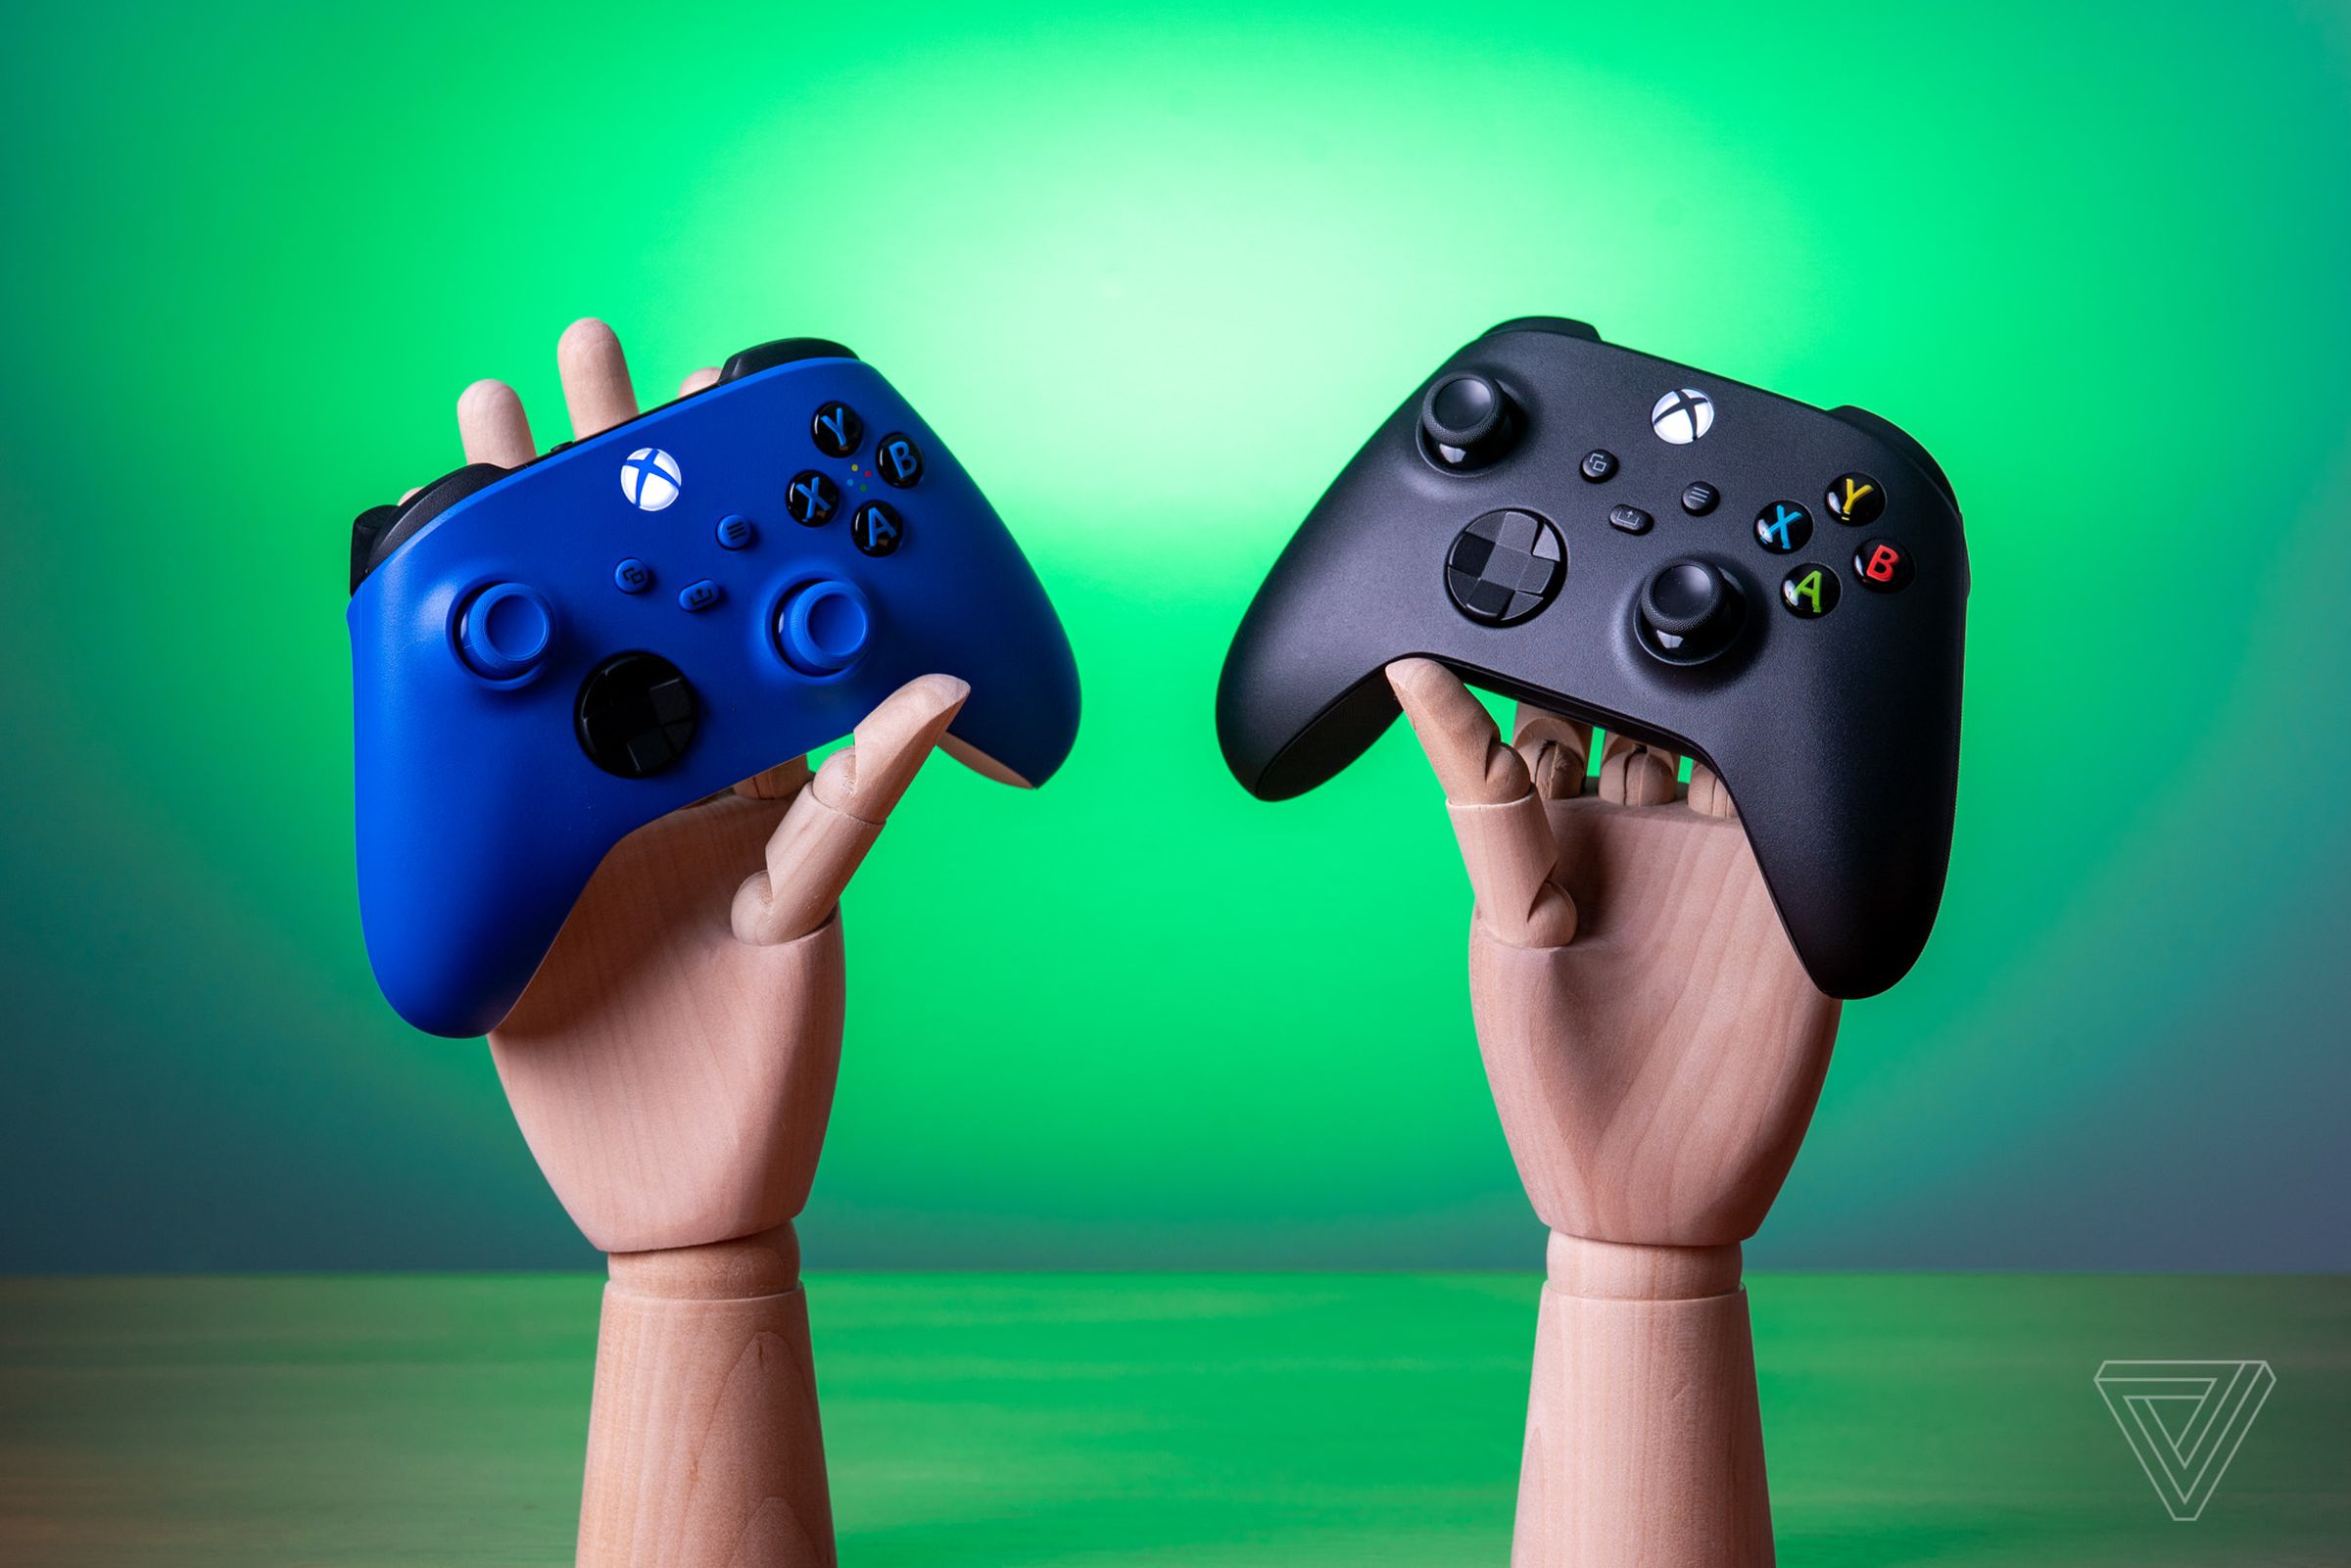 Two Xbox controllers, one blue and one black, being held by wooden mannequin hands.